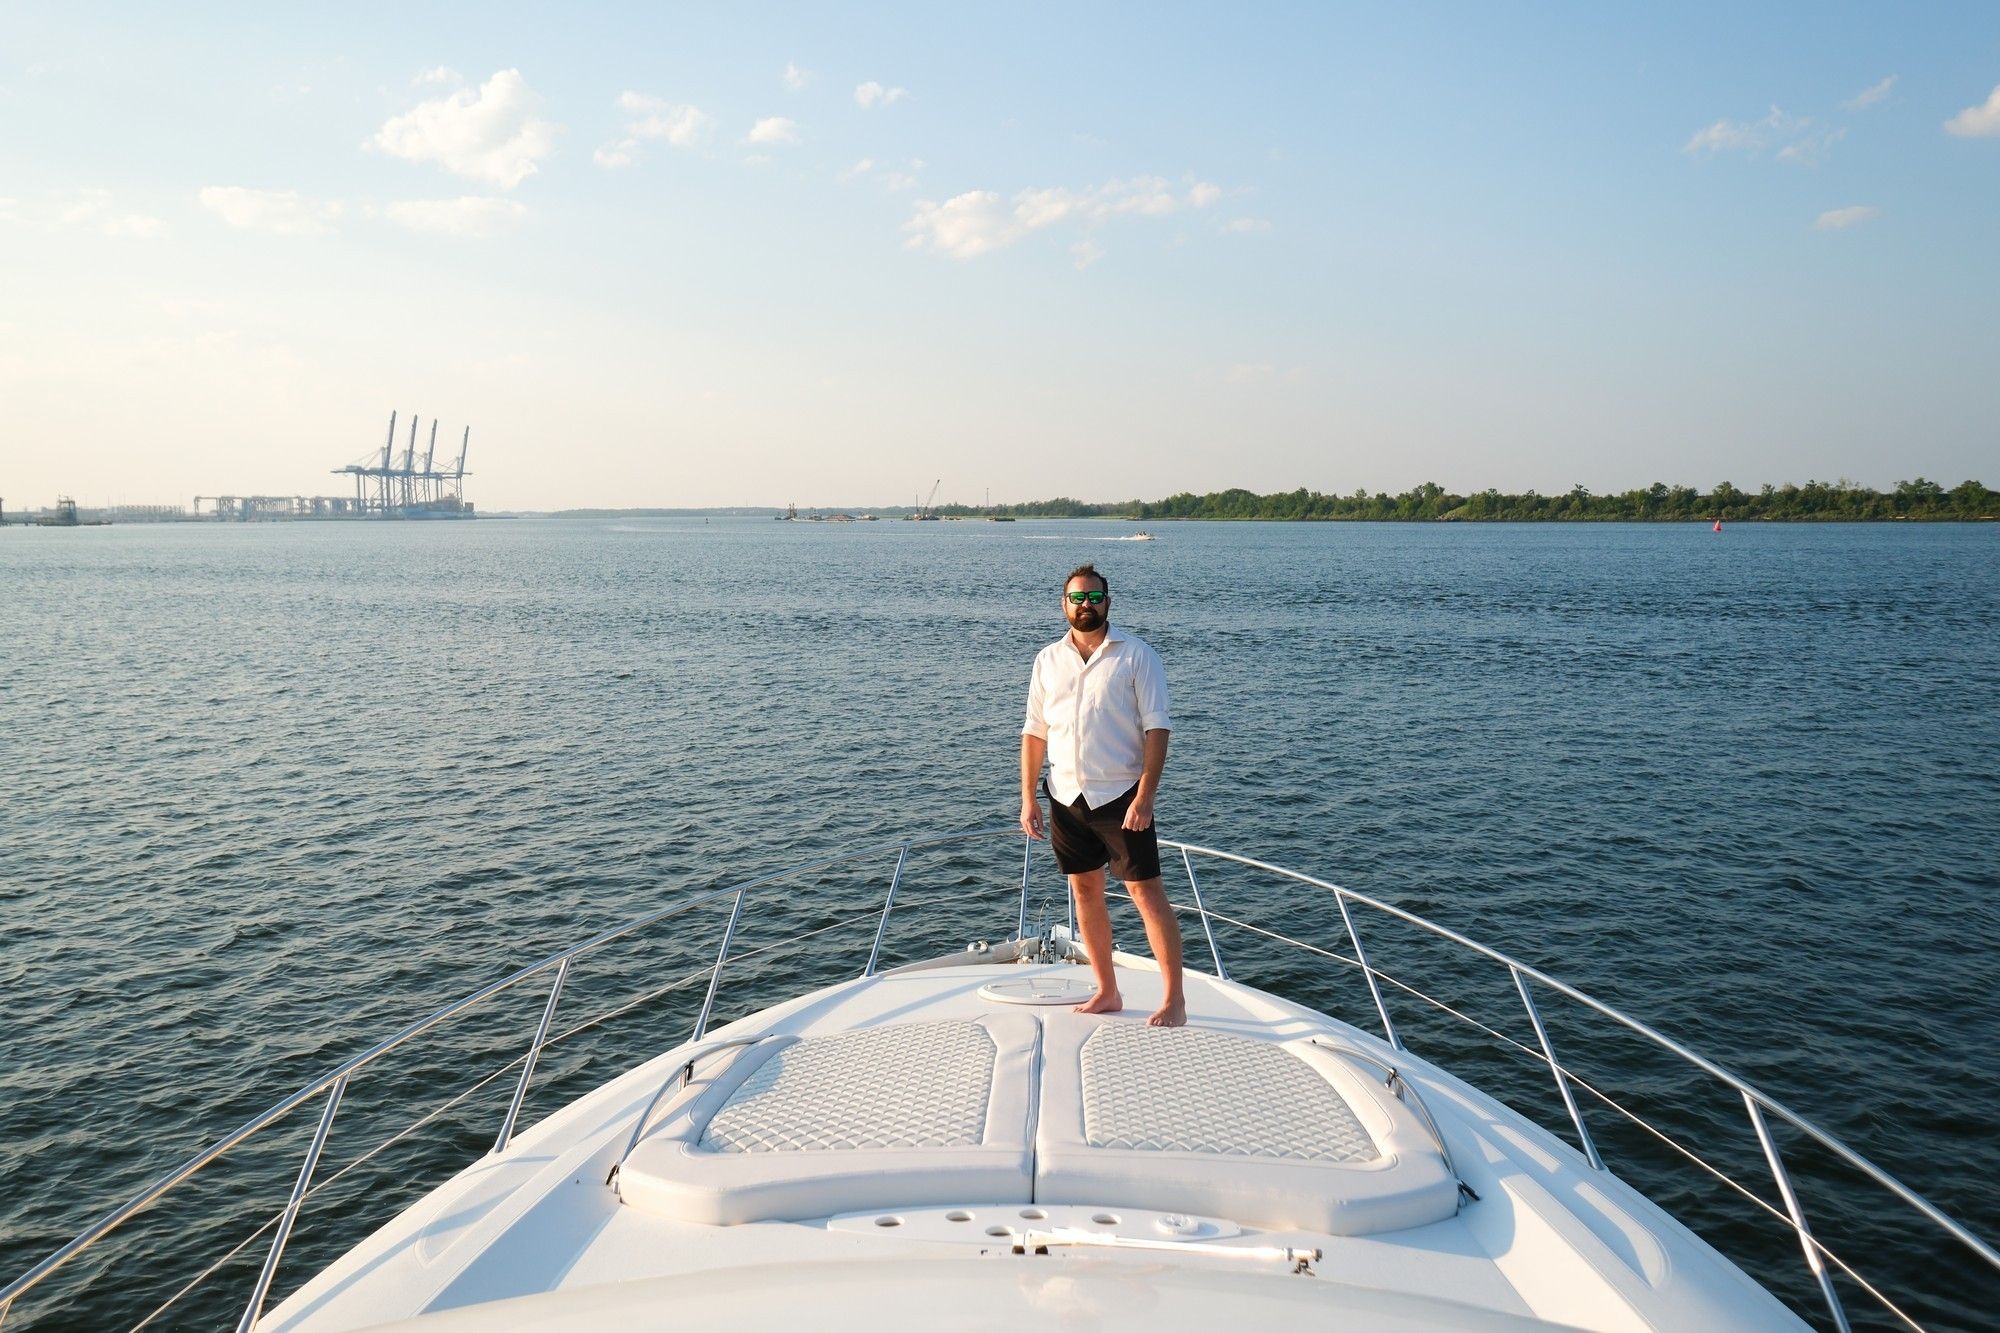 Create lifelong memories surrounded by luxury and impeccable service on Lady Sadie, Charleston's top luxury charter yacht.